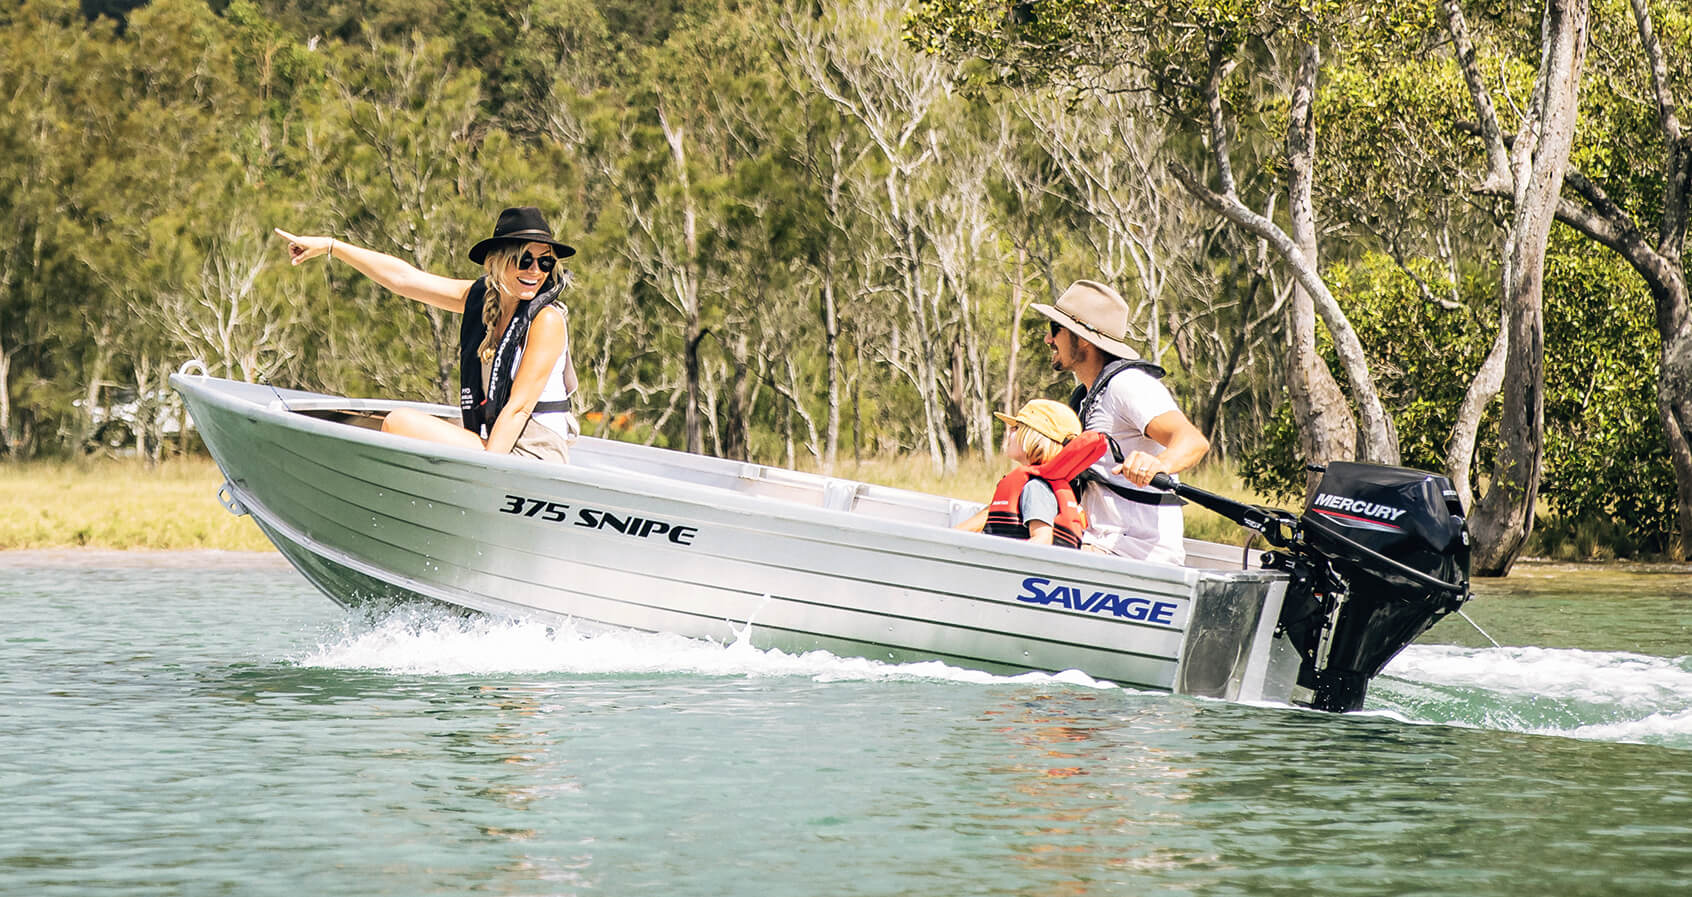 Mercury Marine has launched a savings special just in time for summer on a range of portable outboard engines